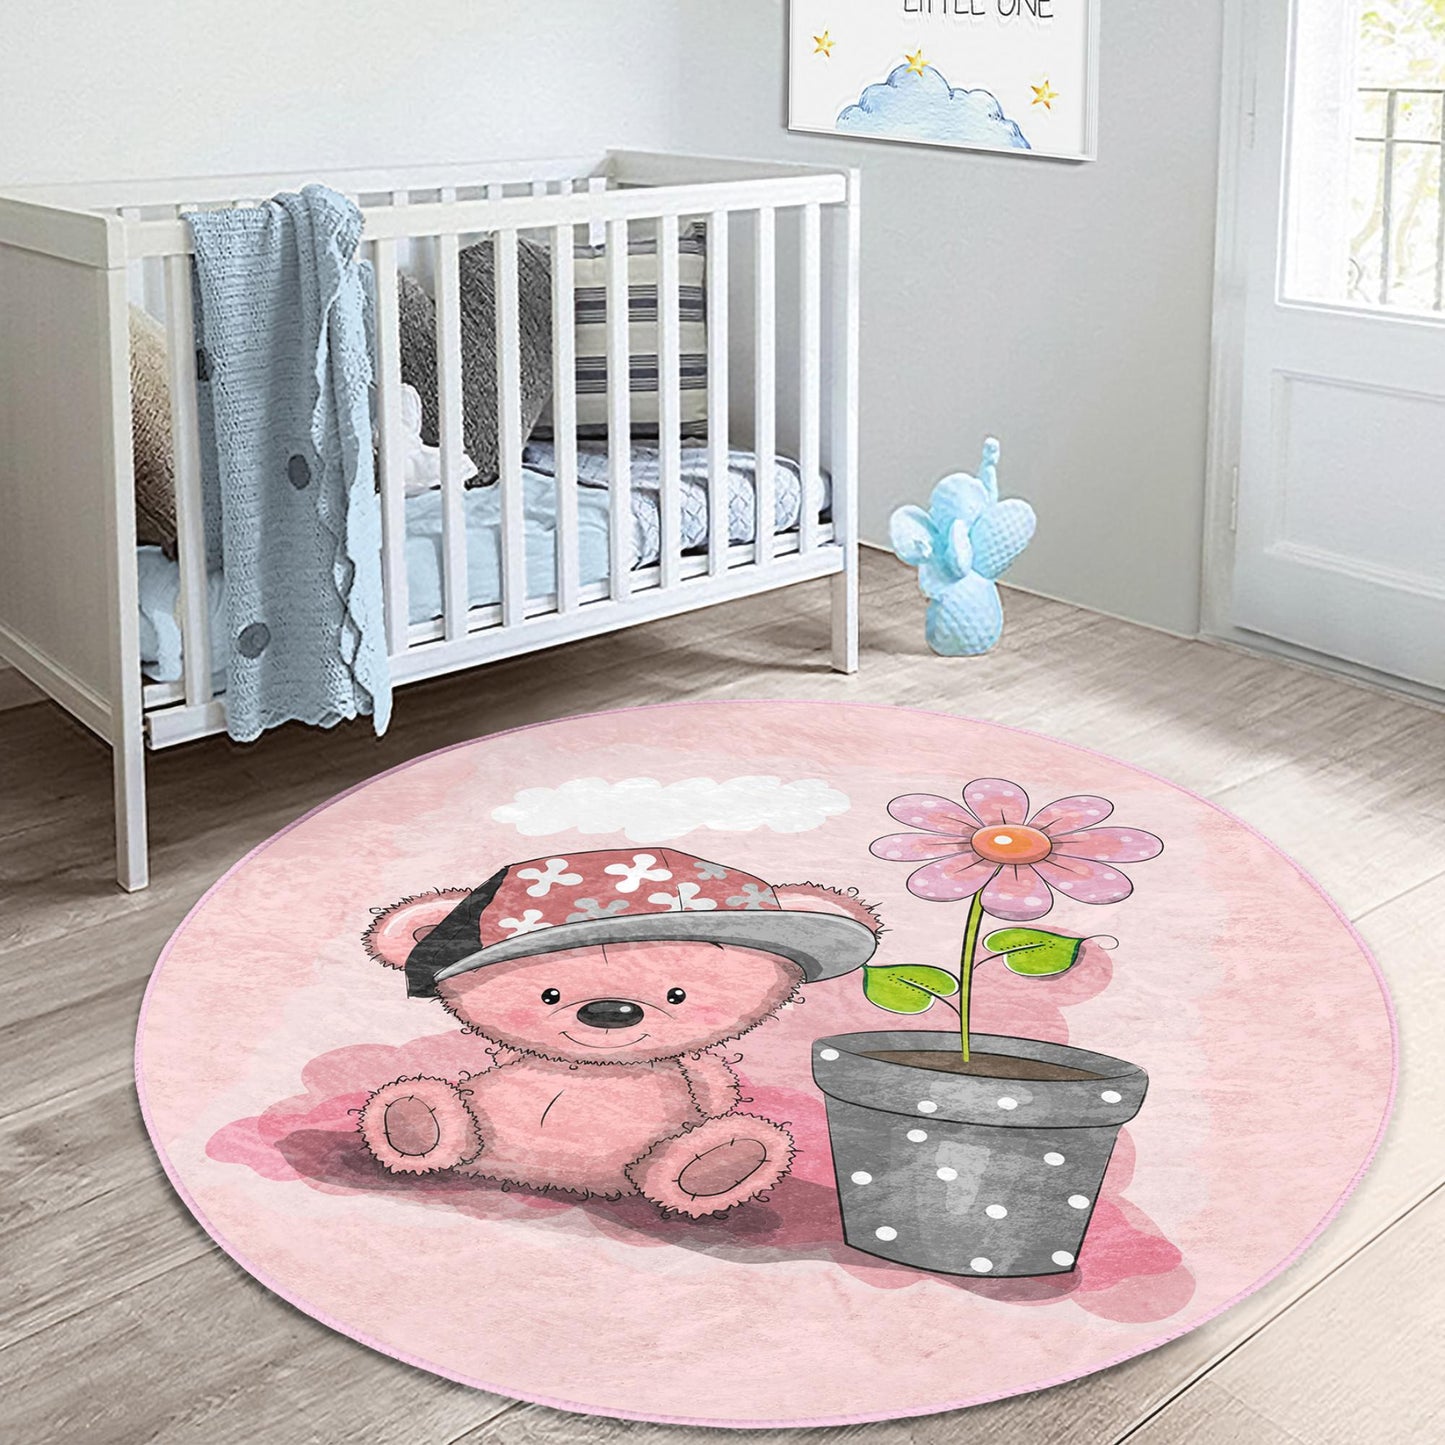 Soft and cozy rug adorned with a cute pink bear motif for children's rooms.